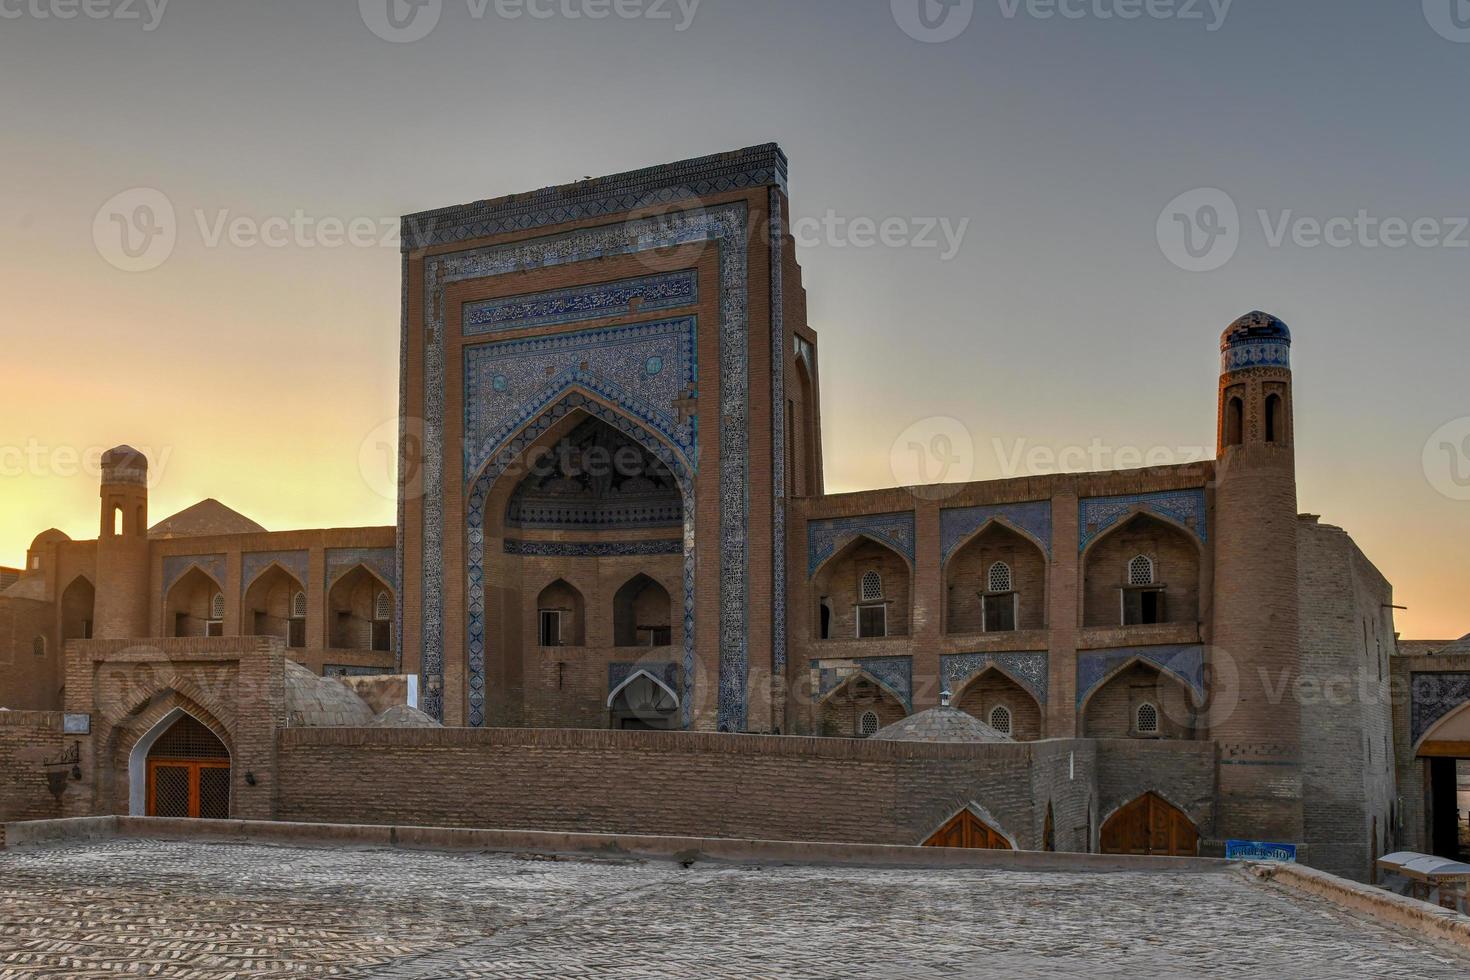 Khoja Berdibai madrasah built in 1688. The madrasah is one of the oldest madrasah which survived in Khiva, Uzbekistan up to date. photo